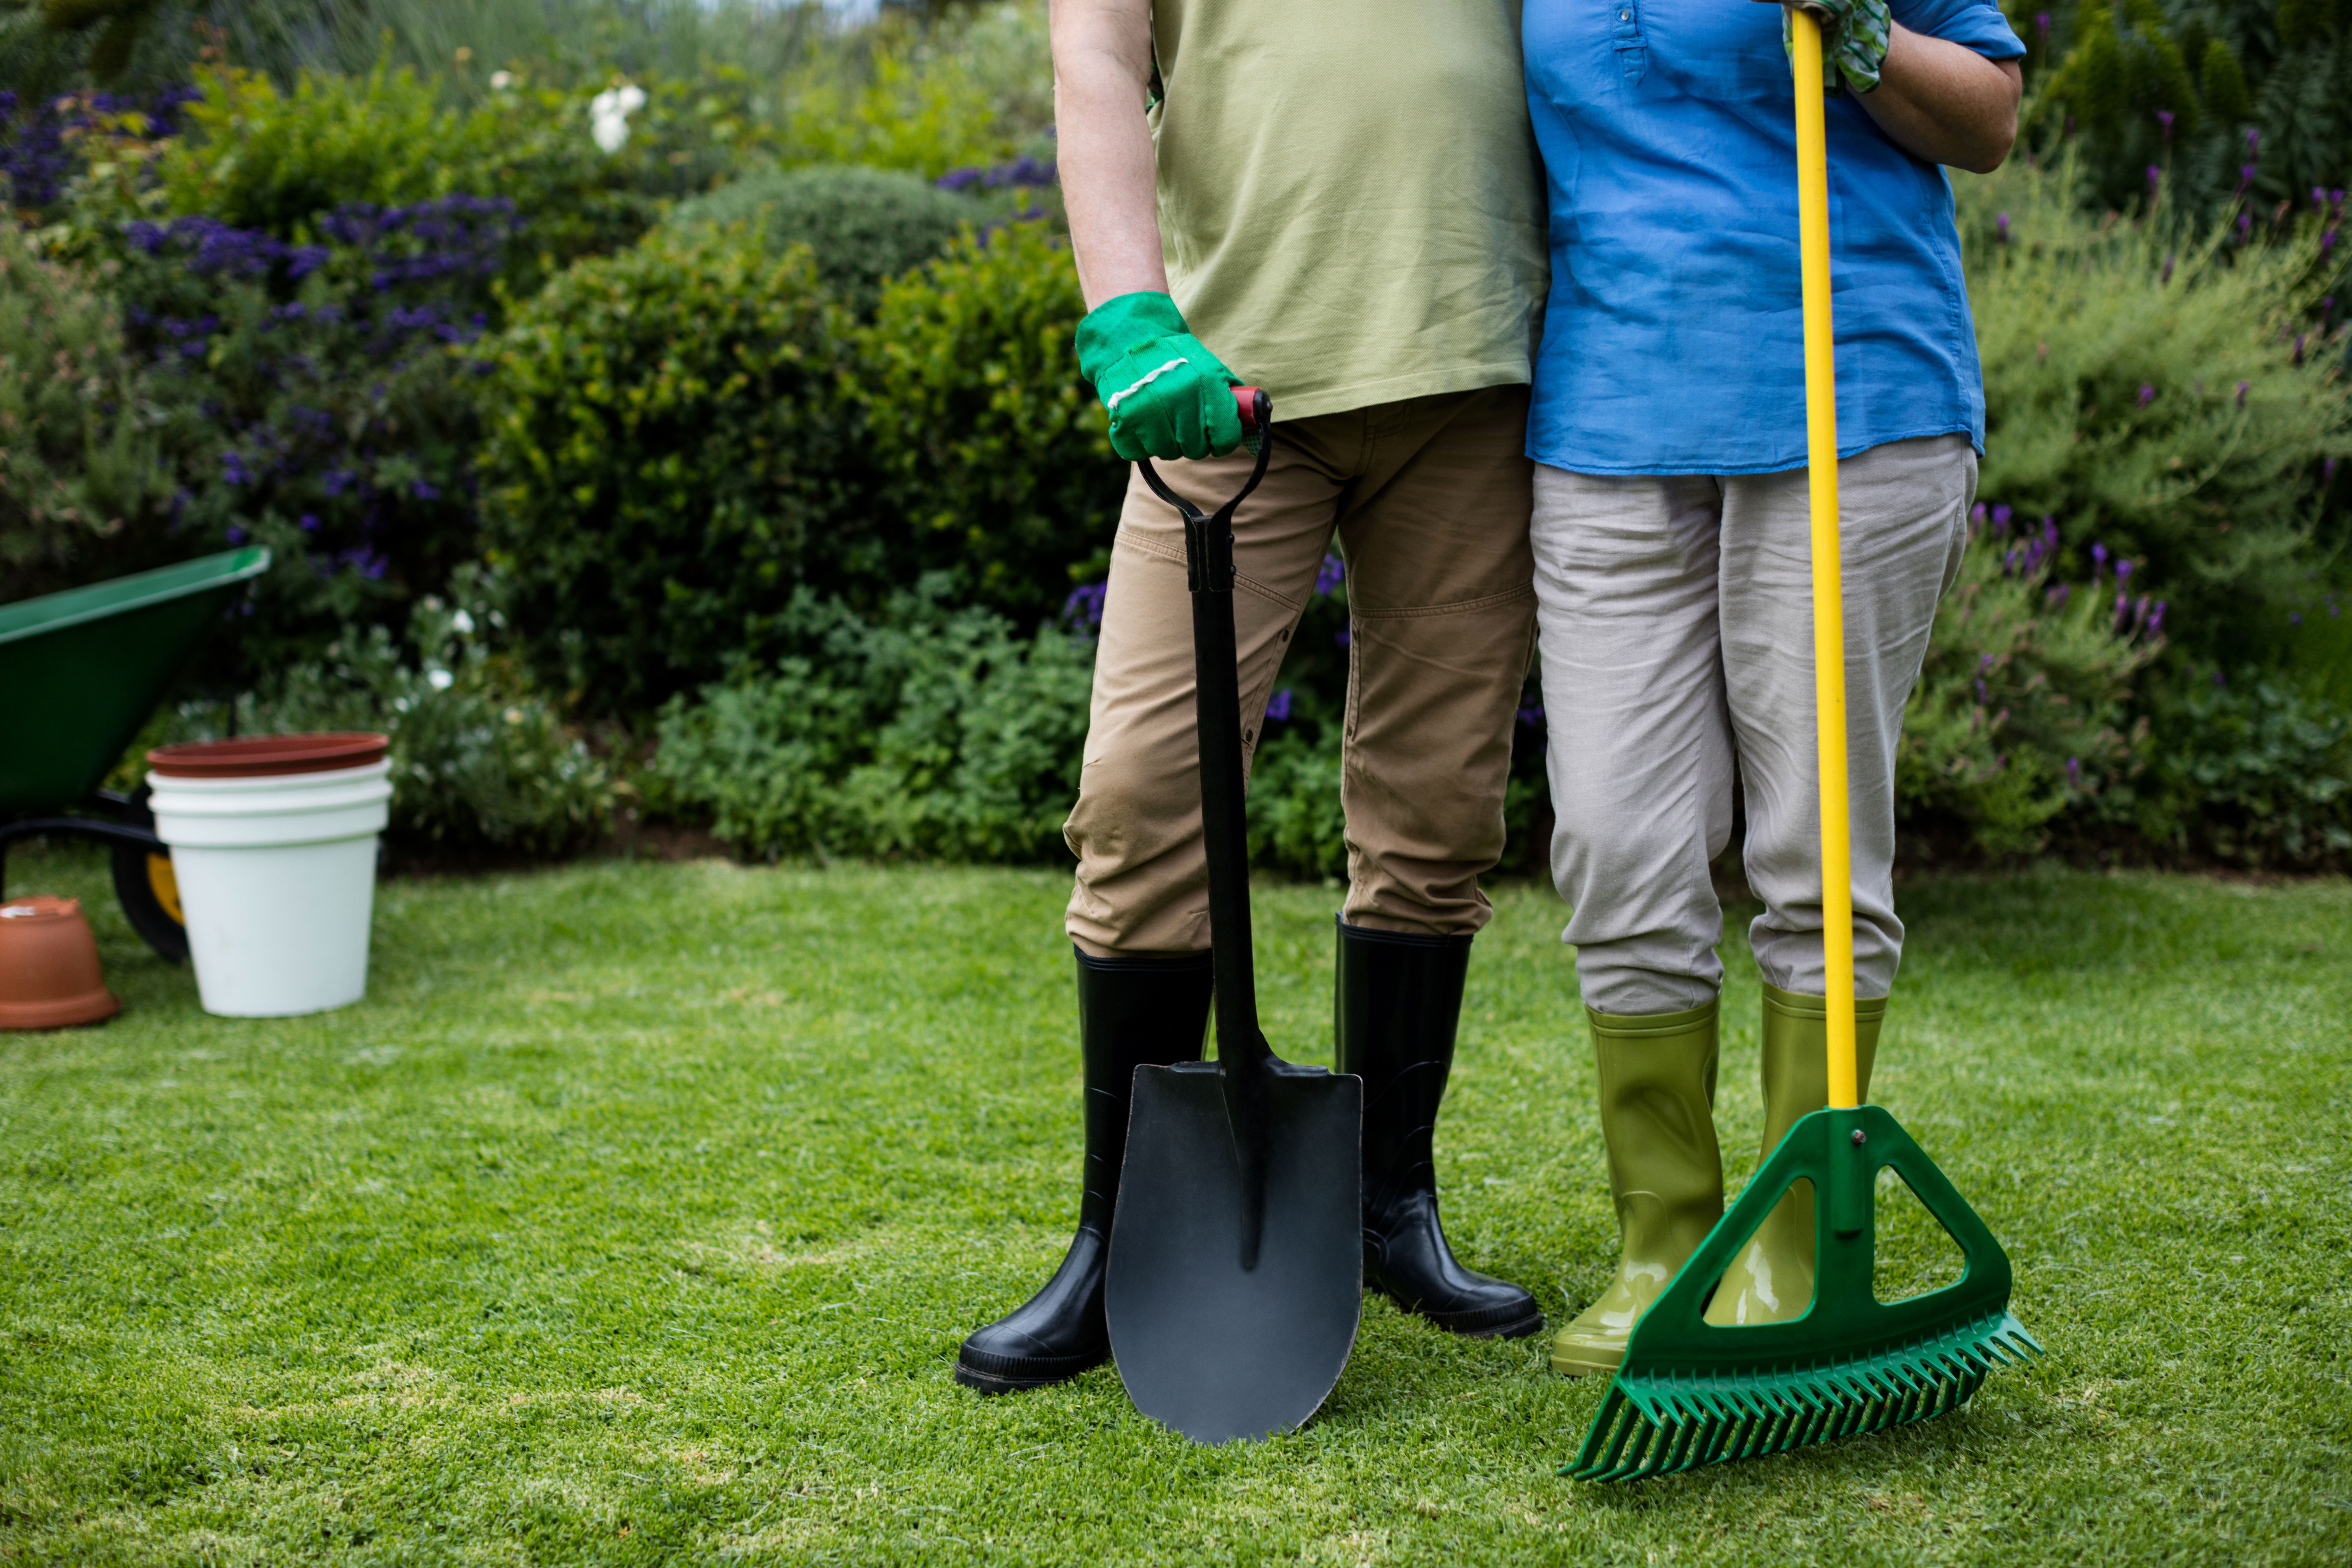 Couple standing on a lawn with garden tools.